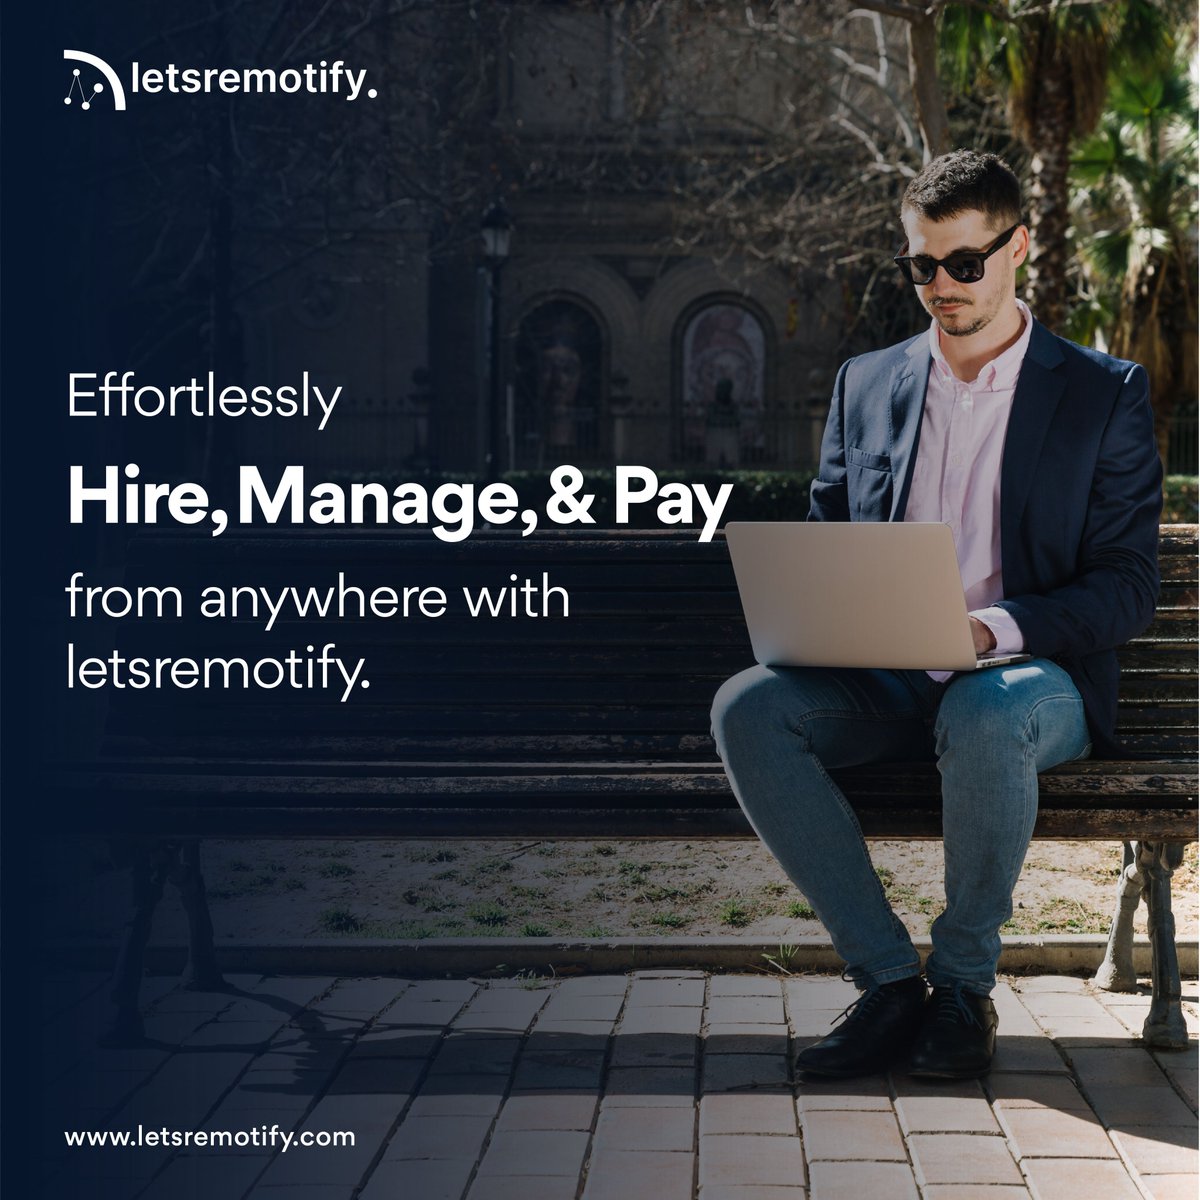 Elevate your team to new heights with letsremotify. Effortlessly hire, manage, and pay from anywhere. Connect with your ideal team now!   
              
Hire Now: letsremotify.com                         
#letsremotify #hirenow #remotework #remoteteams #talent #globaljobs